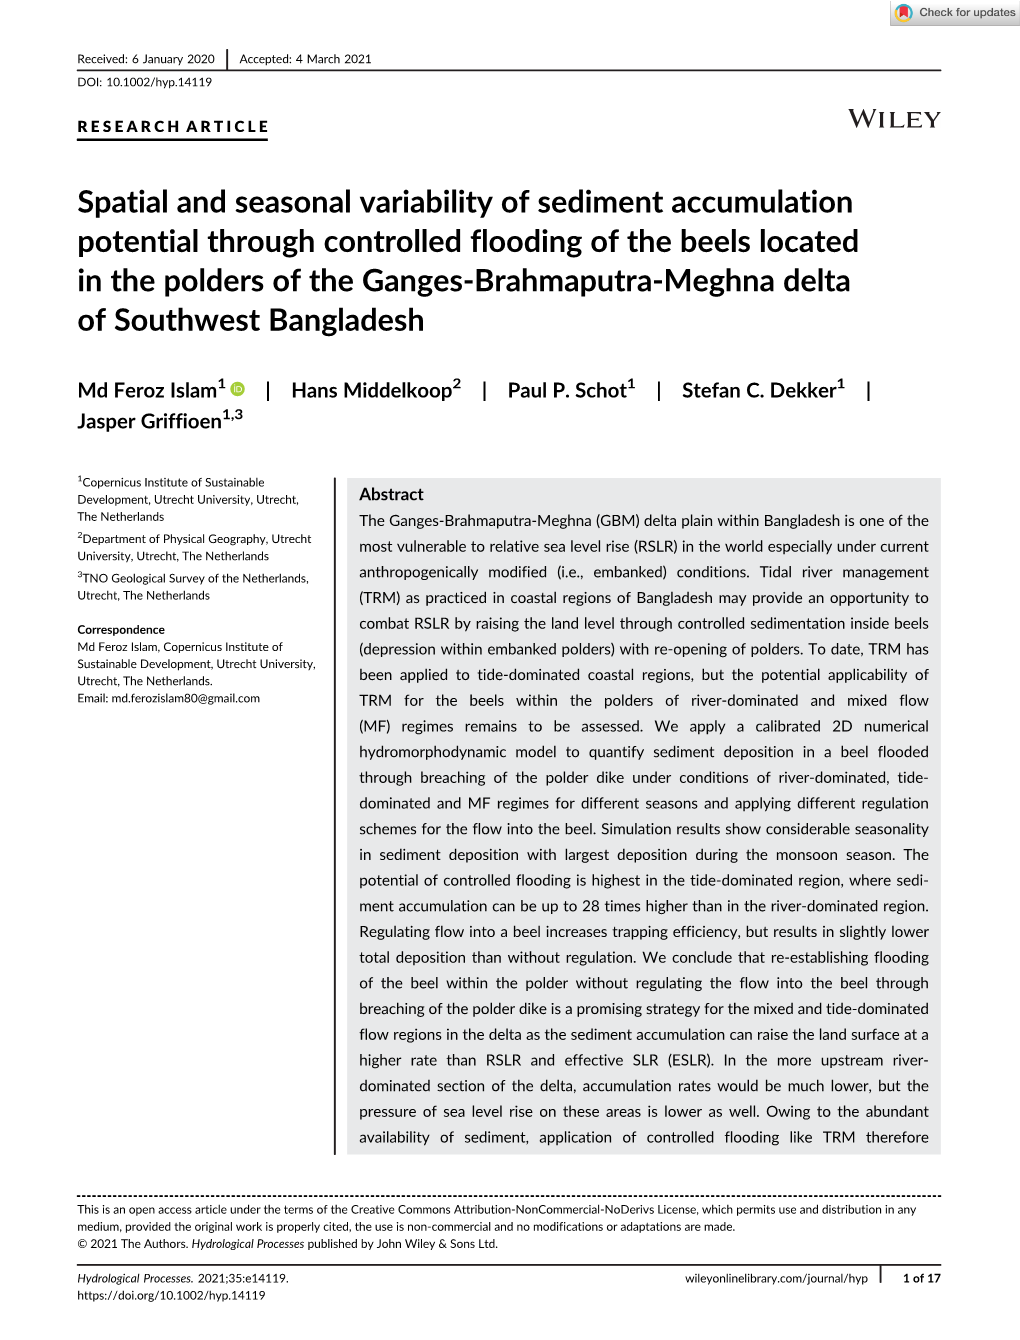 Spatial and Seasonal Variability of Sediment Accumulation Potential